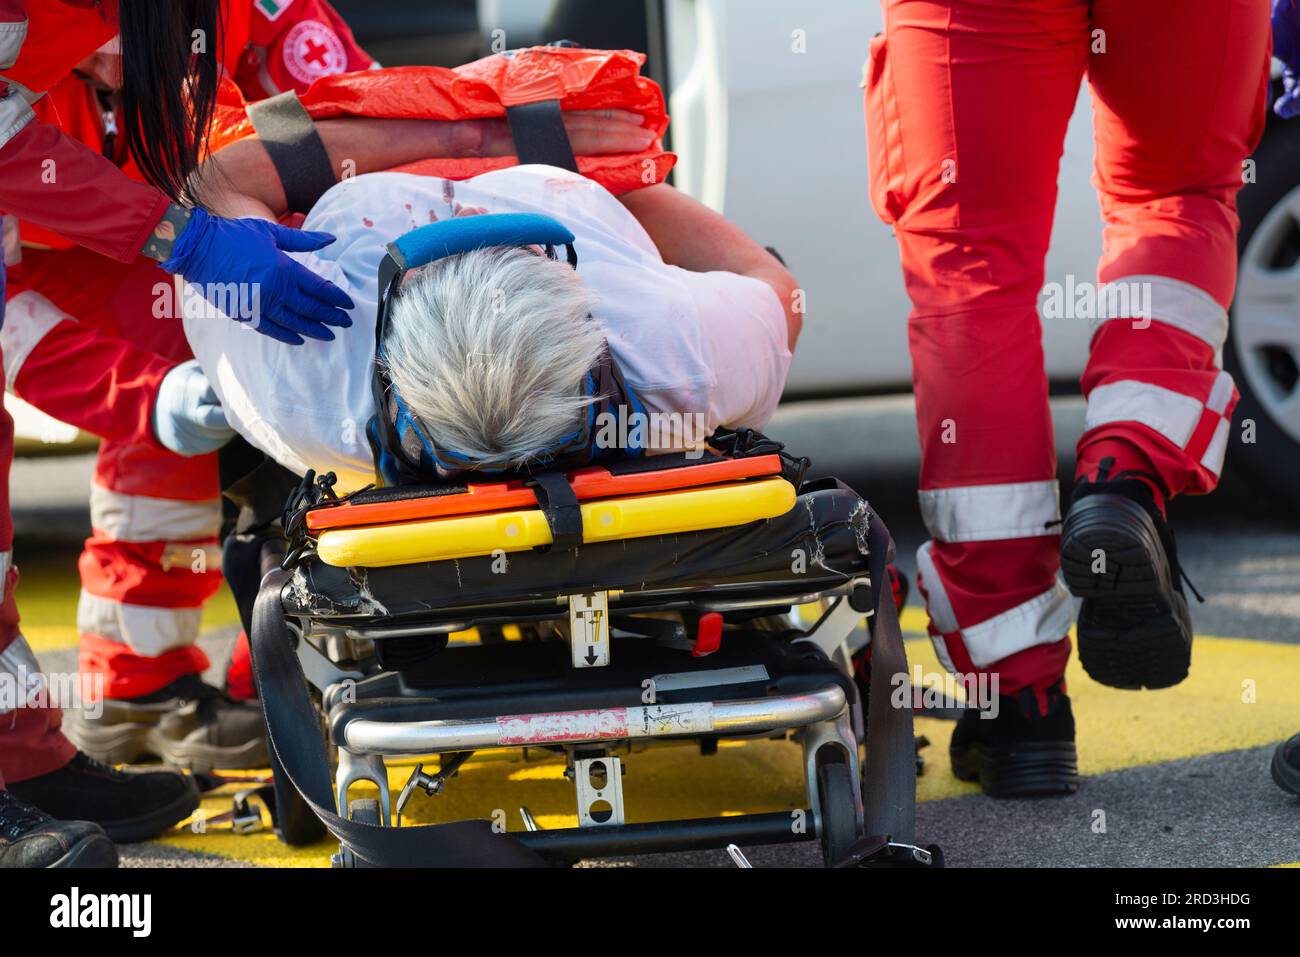 Italy, lombardy, Croce Rossa Italiana, Emergency Medical Services Accident Demonstration Stock Photo